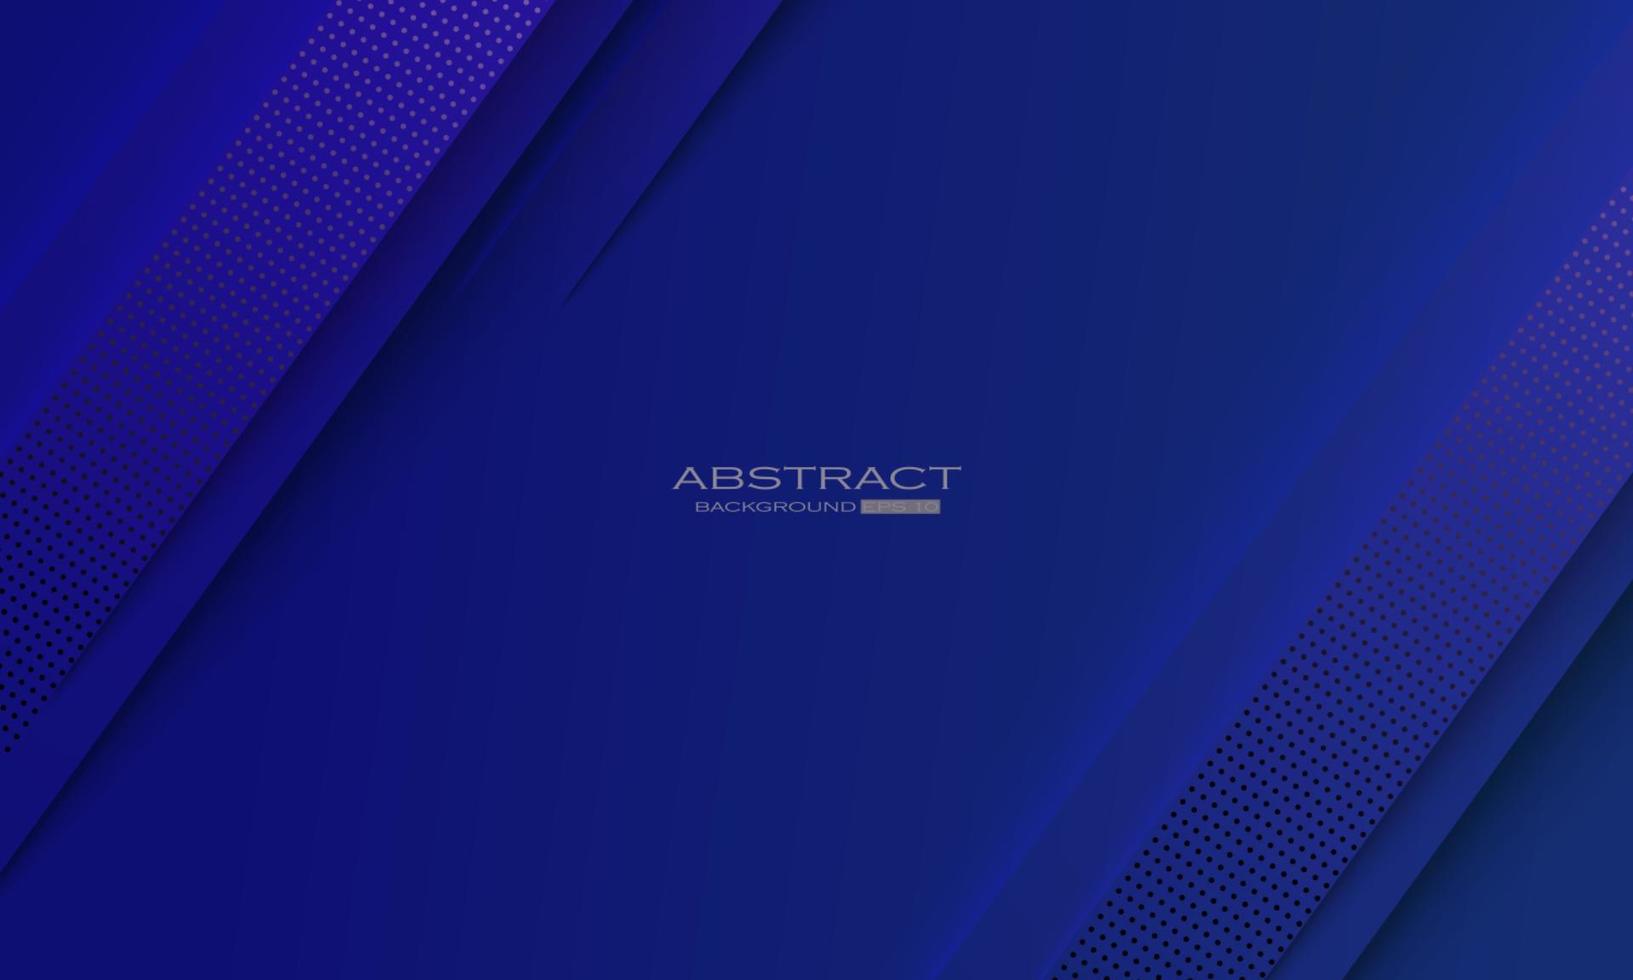 Abstract background with blue theme vector